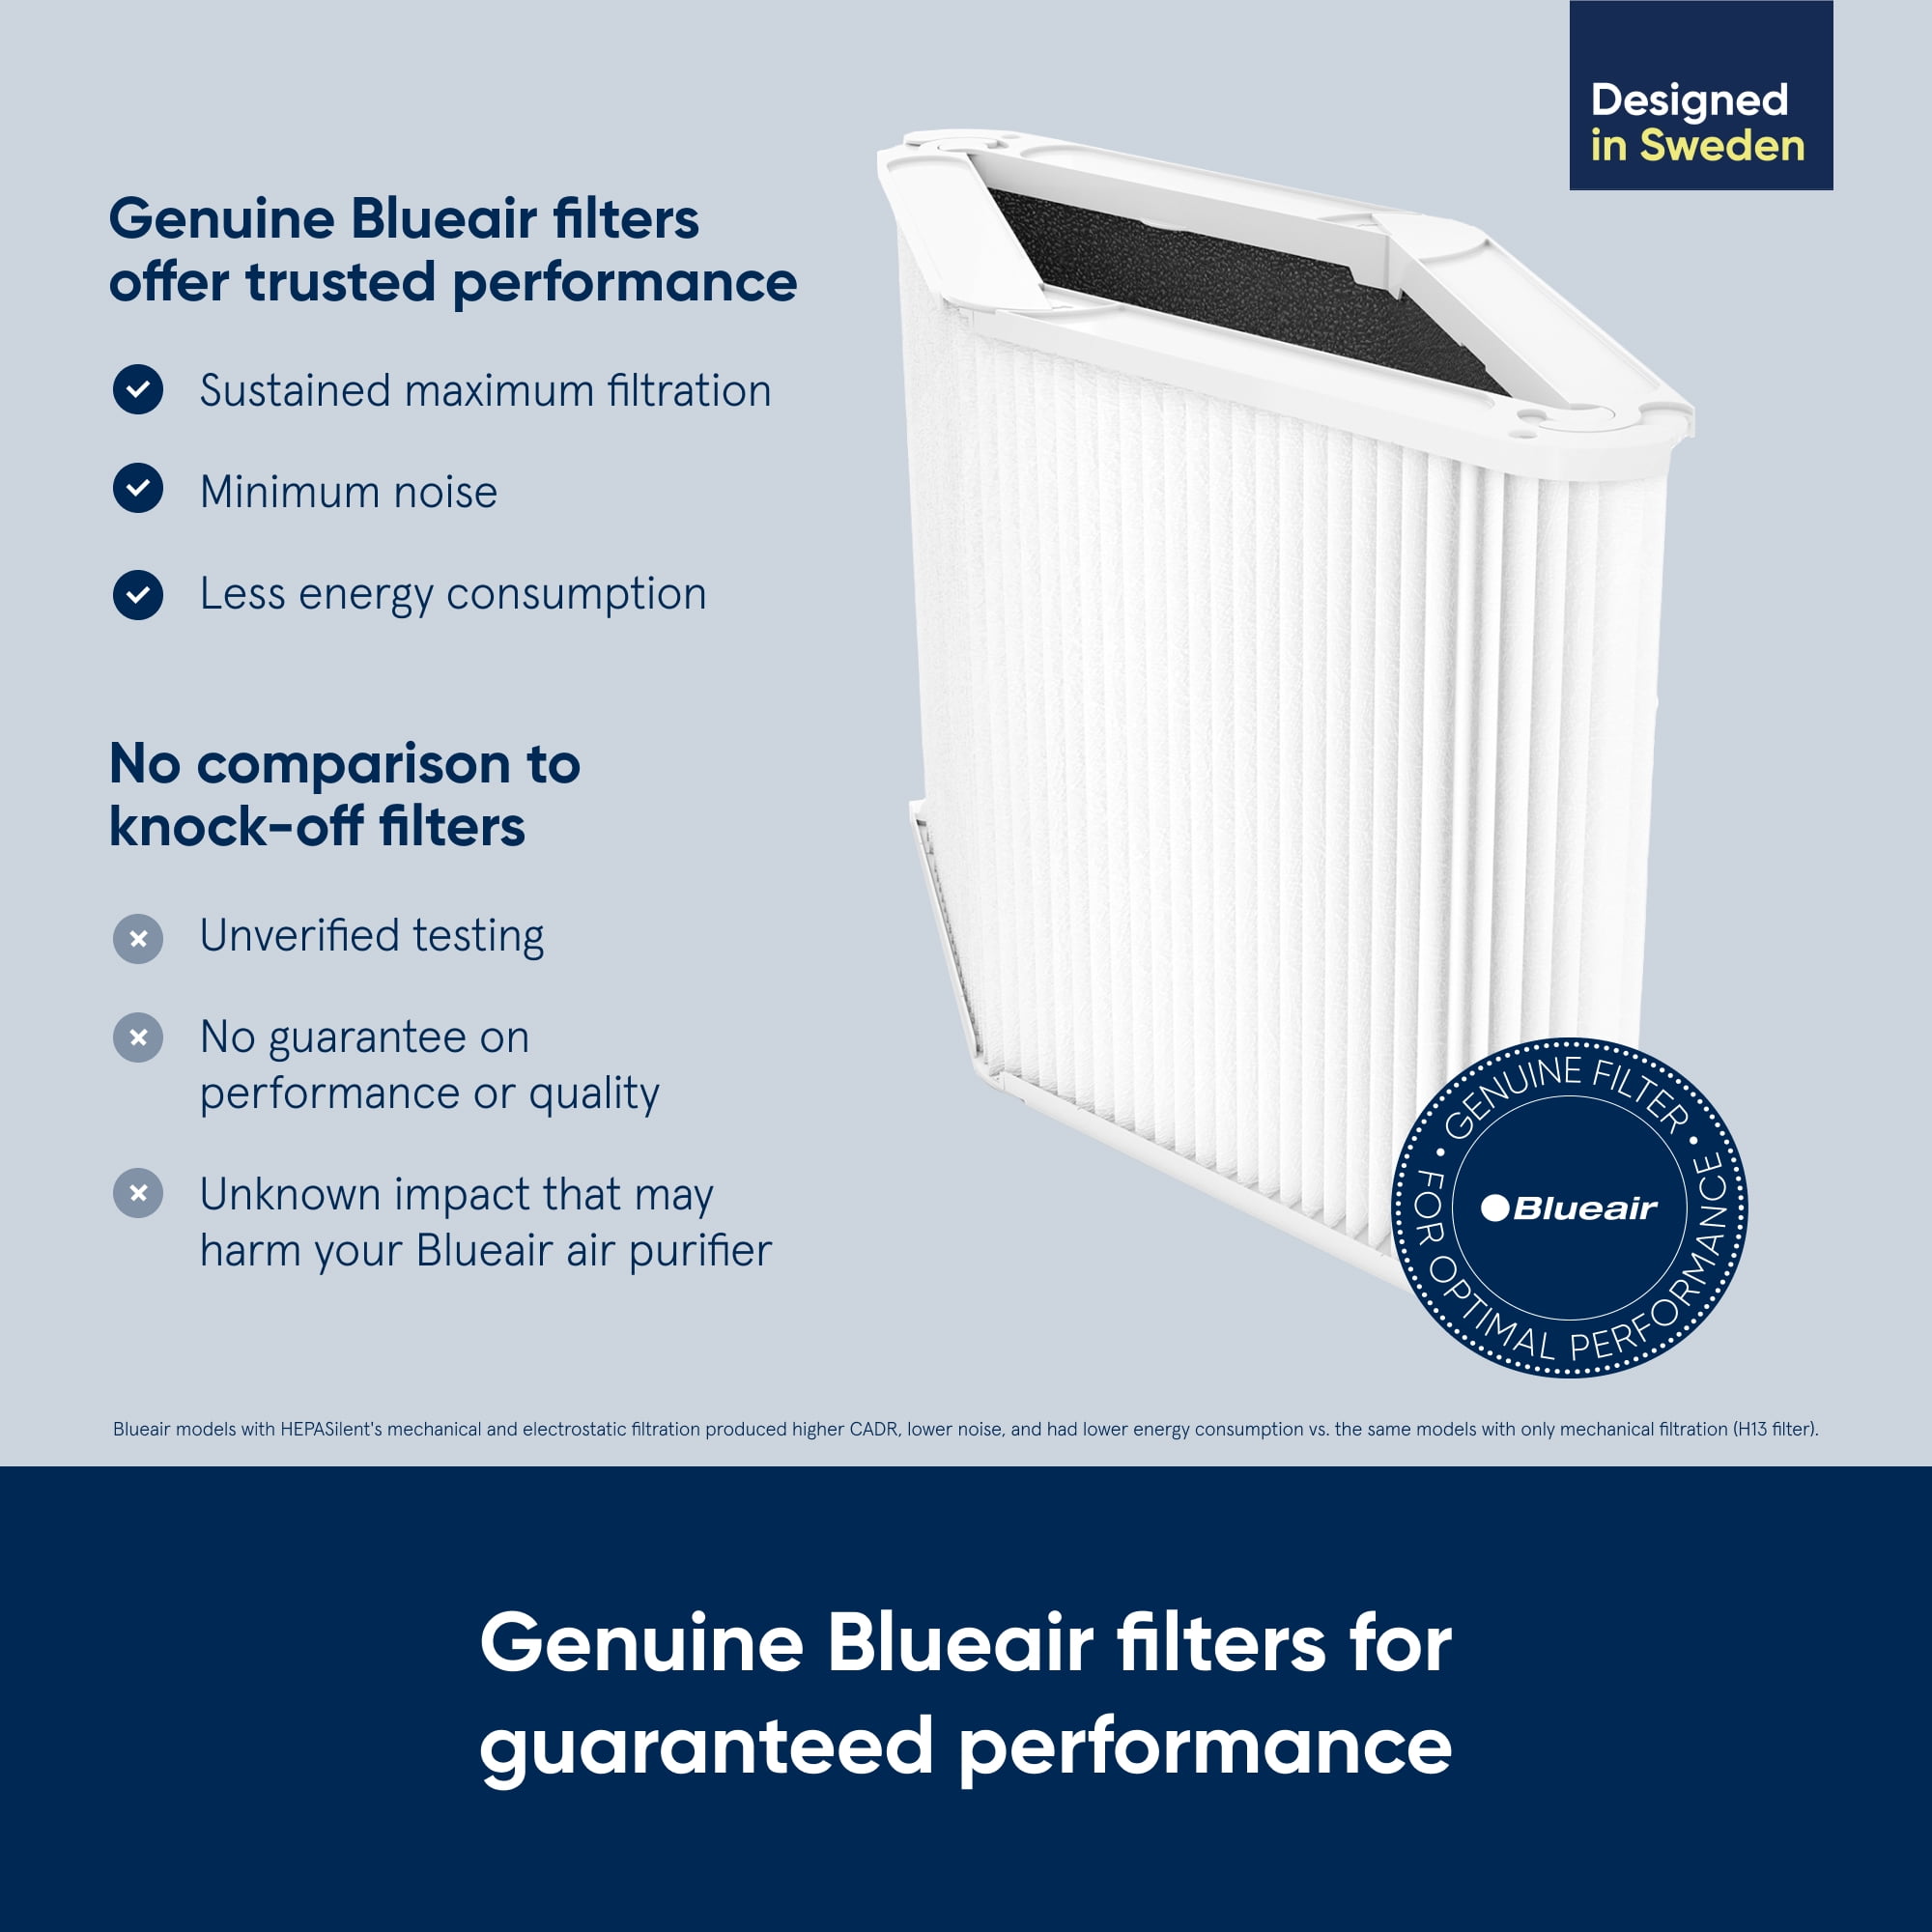 Blueair Blue Pure 211+ Air Purifier 3 Stage with Two Washable Pre-Filters, Particle, Carbon Filter, Captures Allergens, Odors, Smoke, Mold, Dust